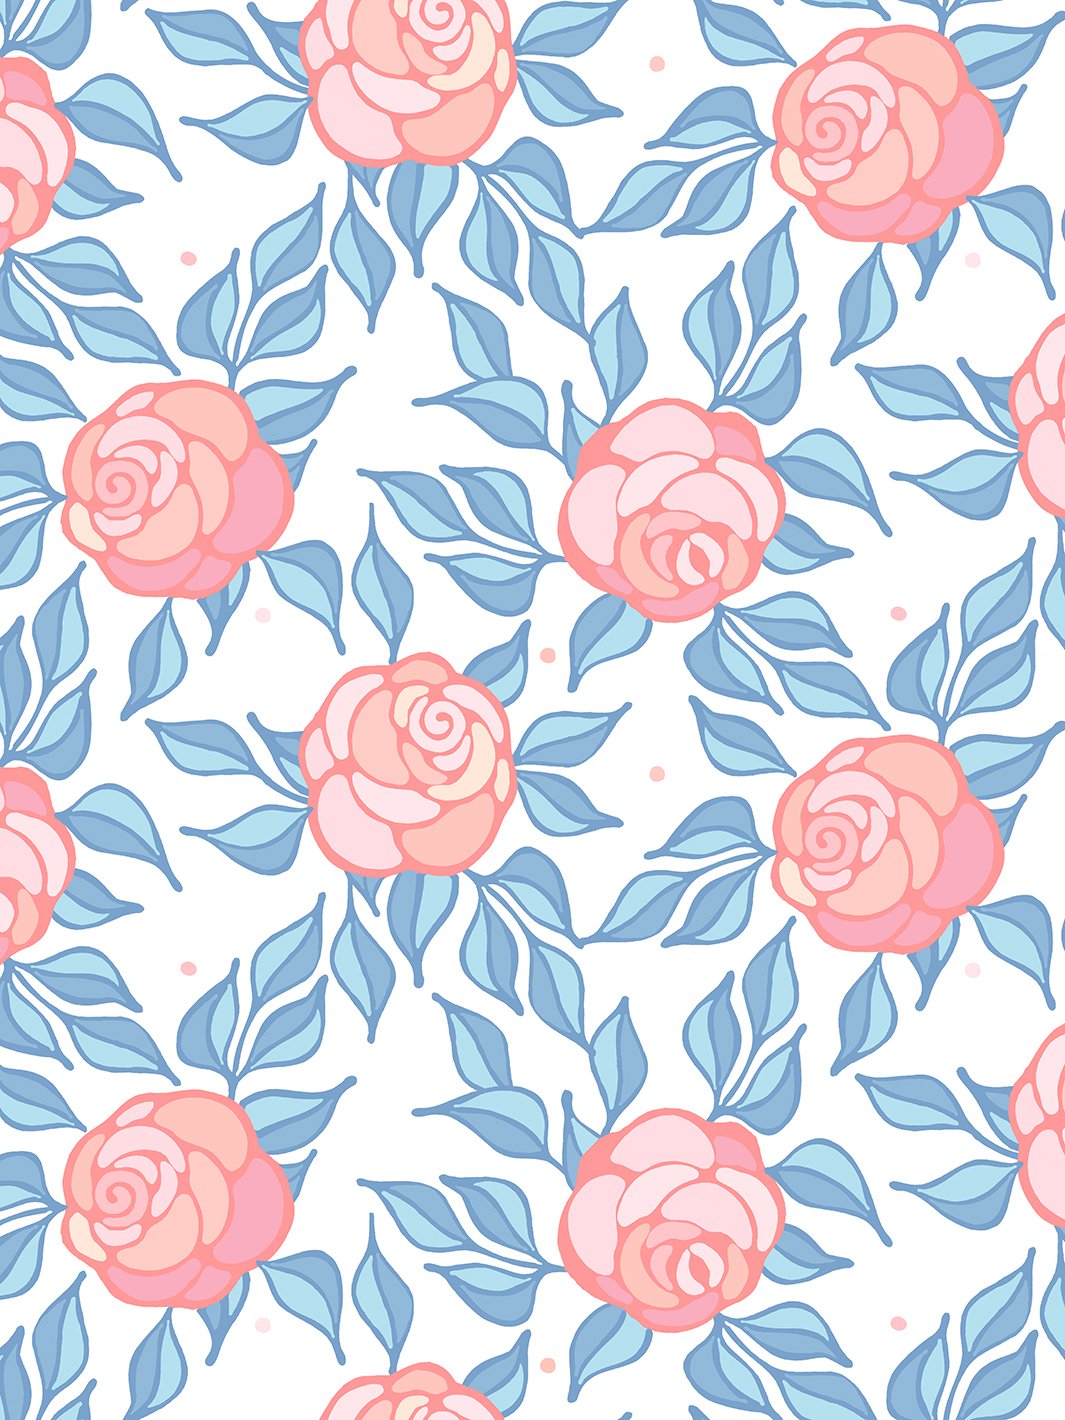 Groovy Pink Flower Wrapping Paper by Simple Decor